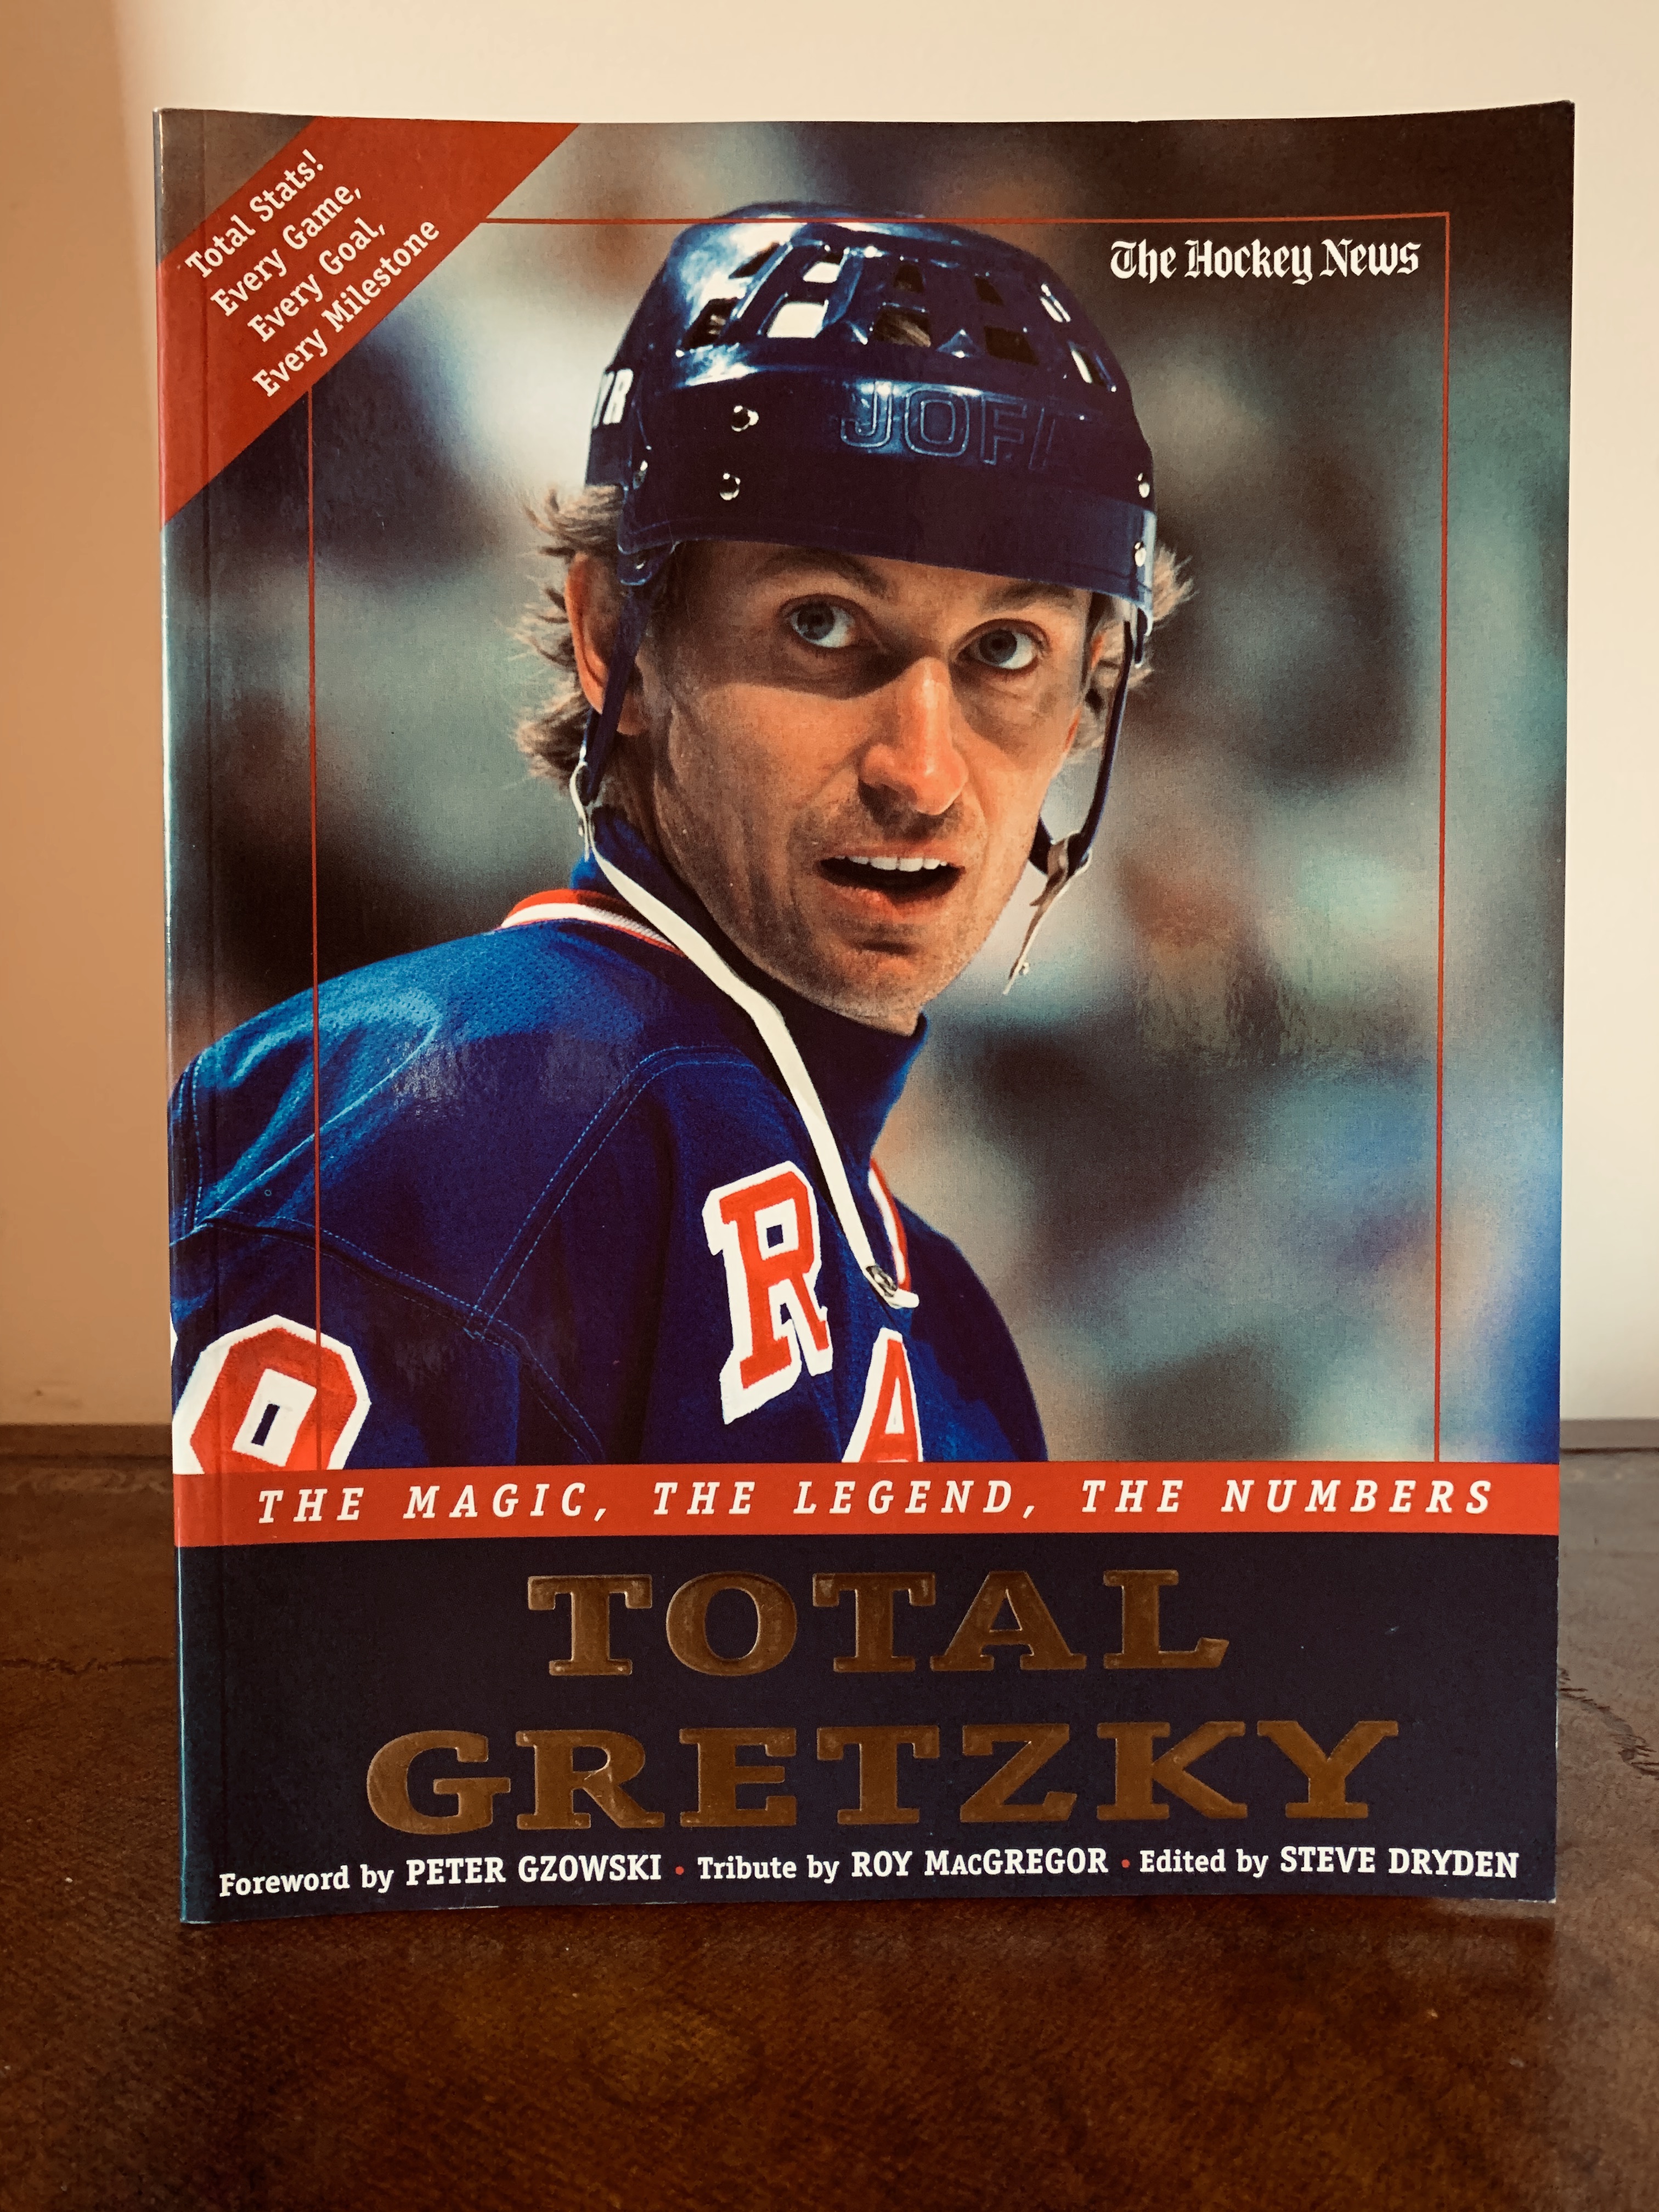 Wayne Gretzky: The Making of a Great One [Book]